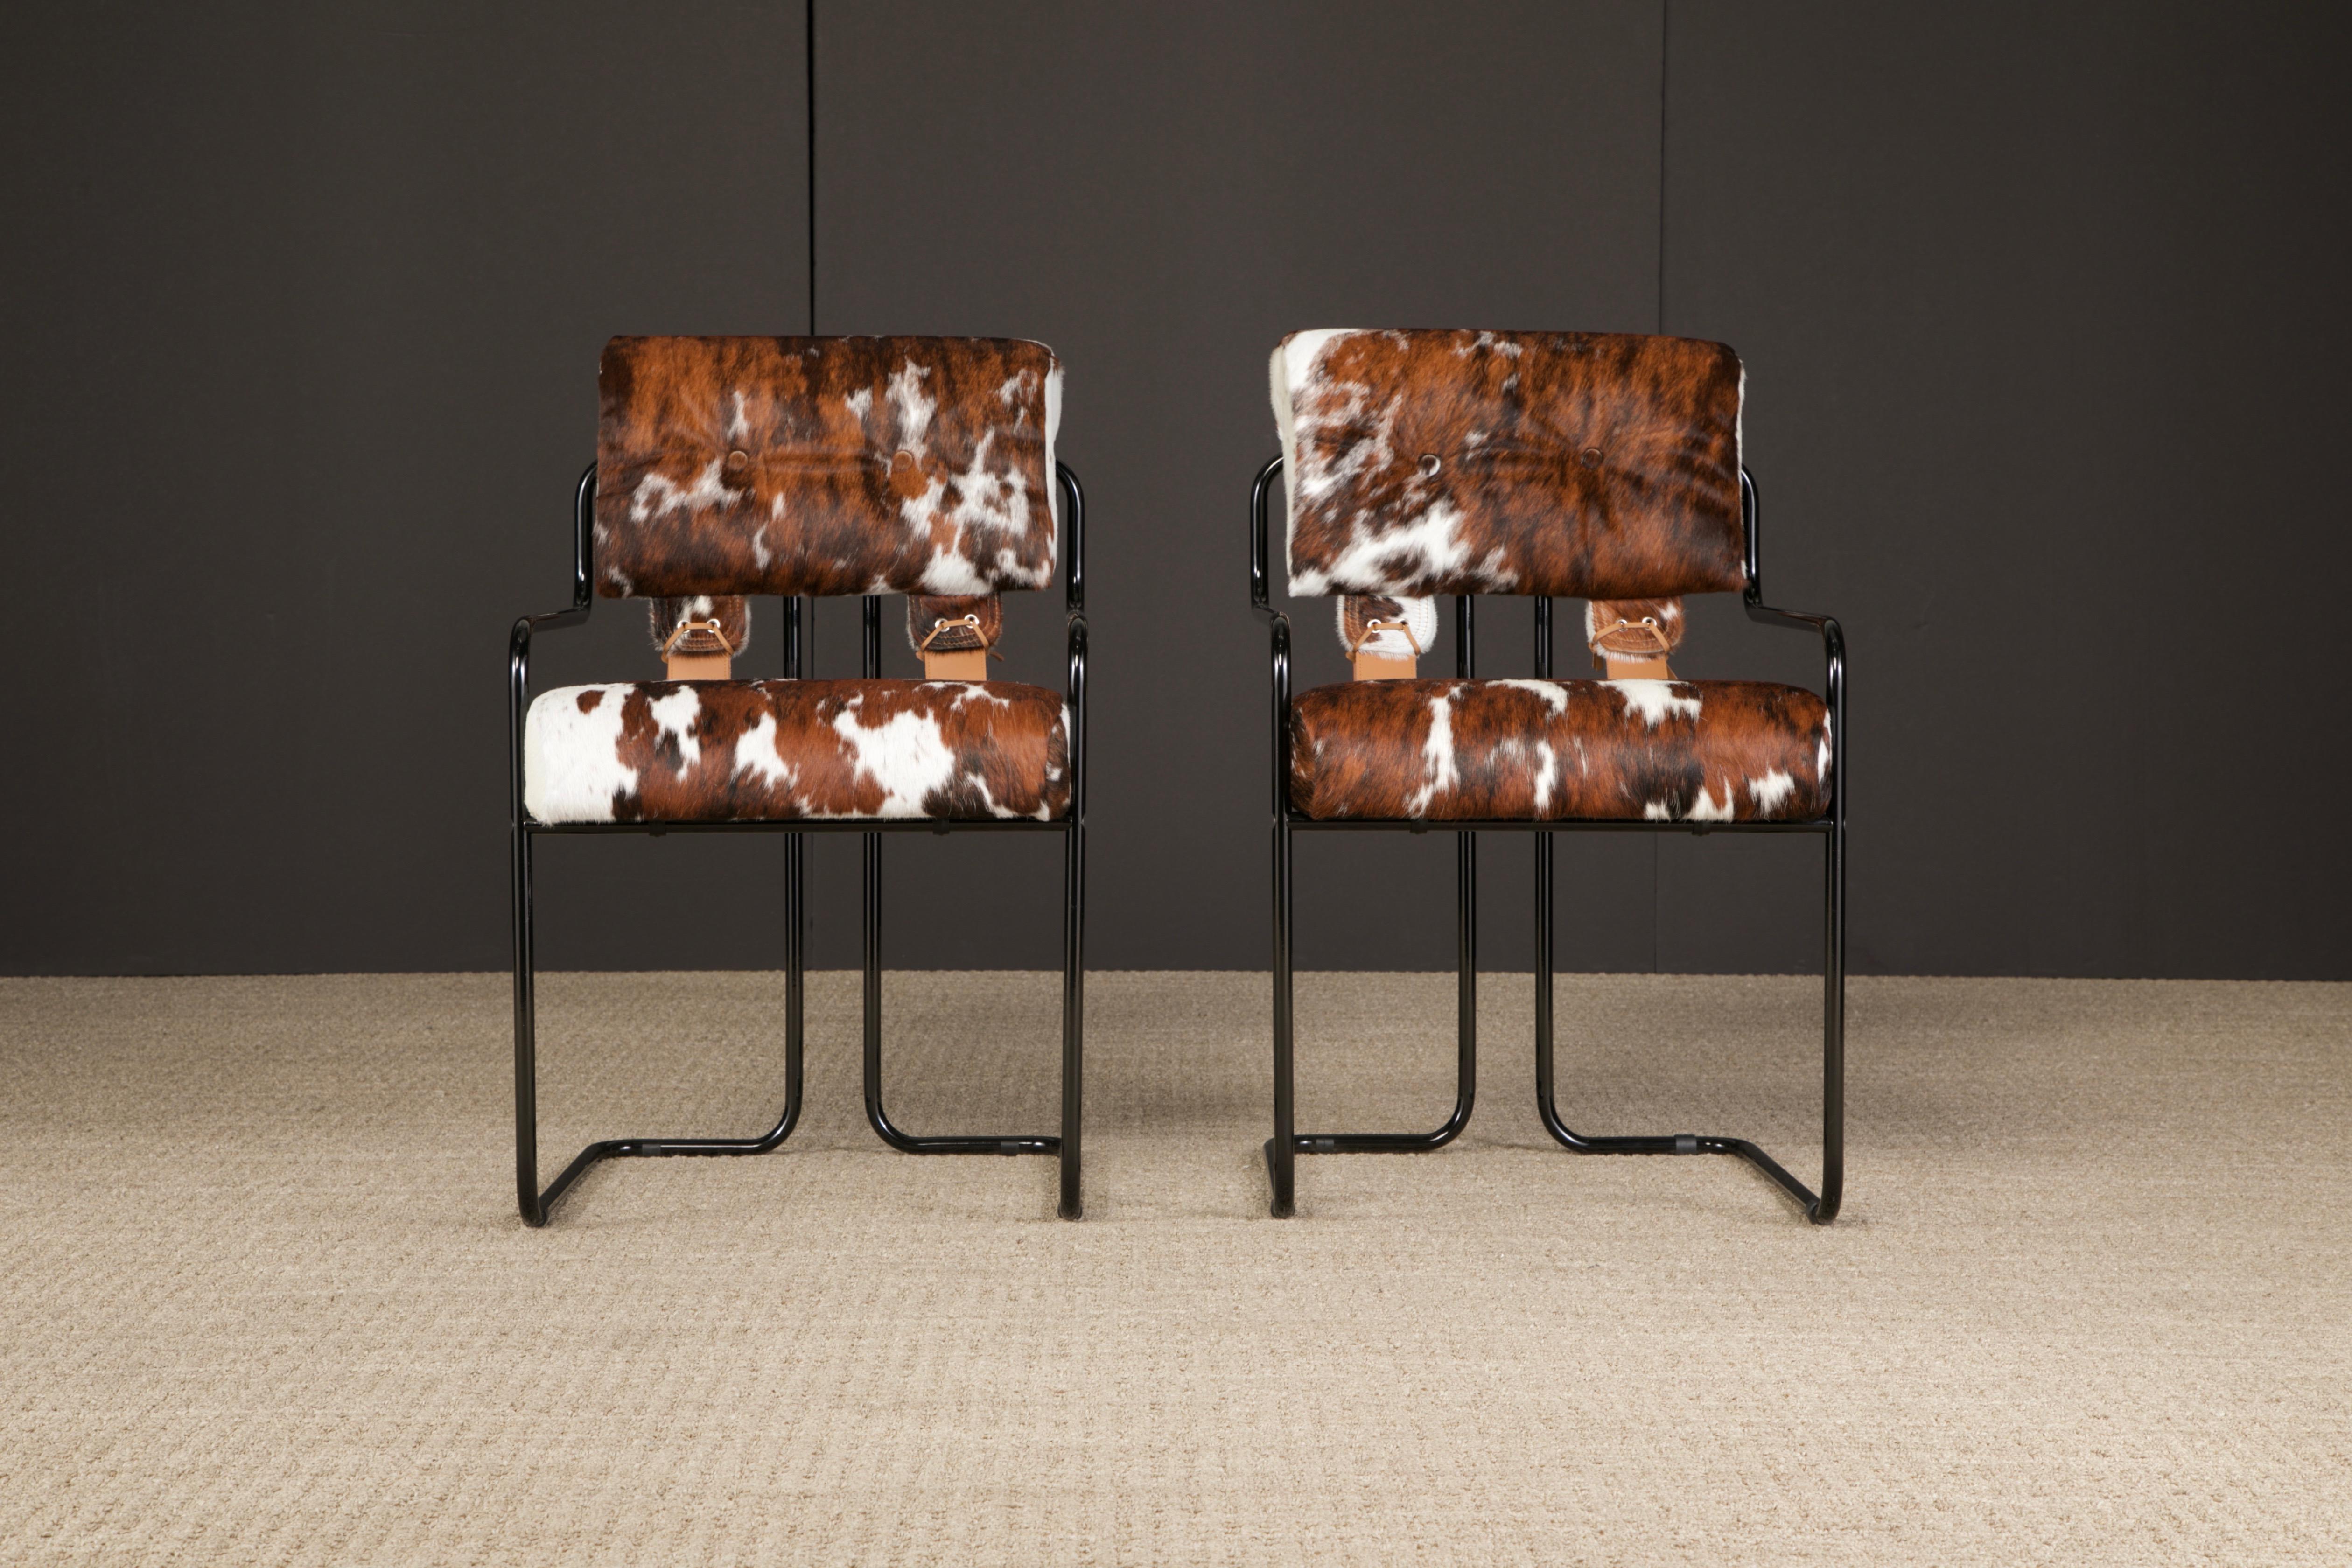 Currently, the most coveted dining chairs by interior designers are 'Tucroma' chairs by Guido Faleschini for i4 Mariani, and we have this incredible pair (2) of Tucroma armchairs in beautiful spotted brown and white cowhide leather with black